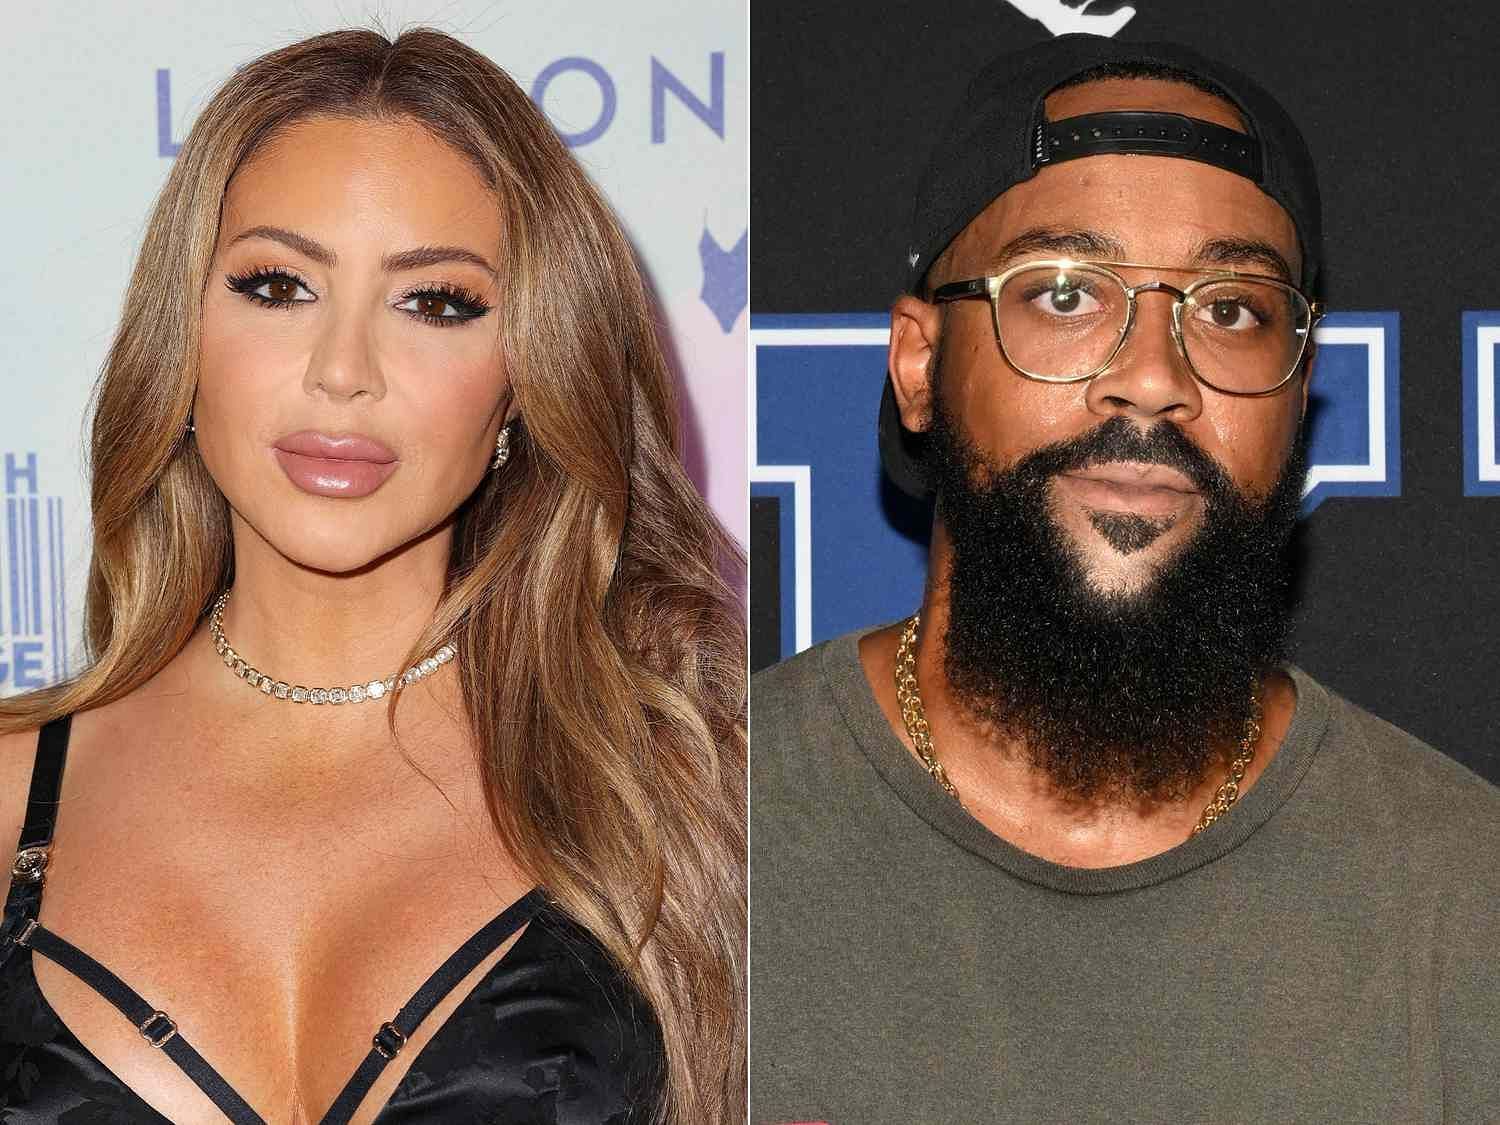 Marcus Jordan and Larsa Pippen scrapped their friendship for a romantic relationship. [photo: People.com]